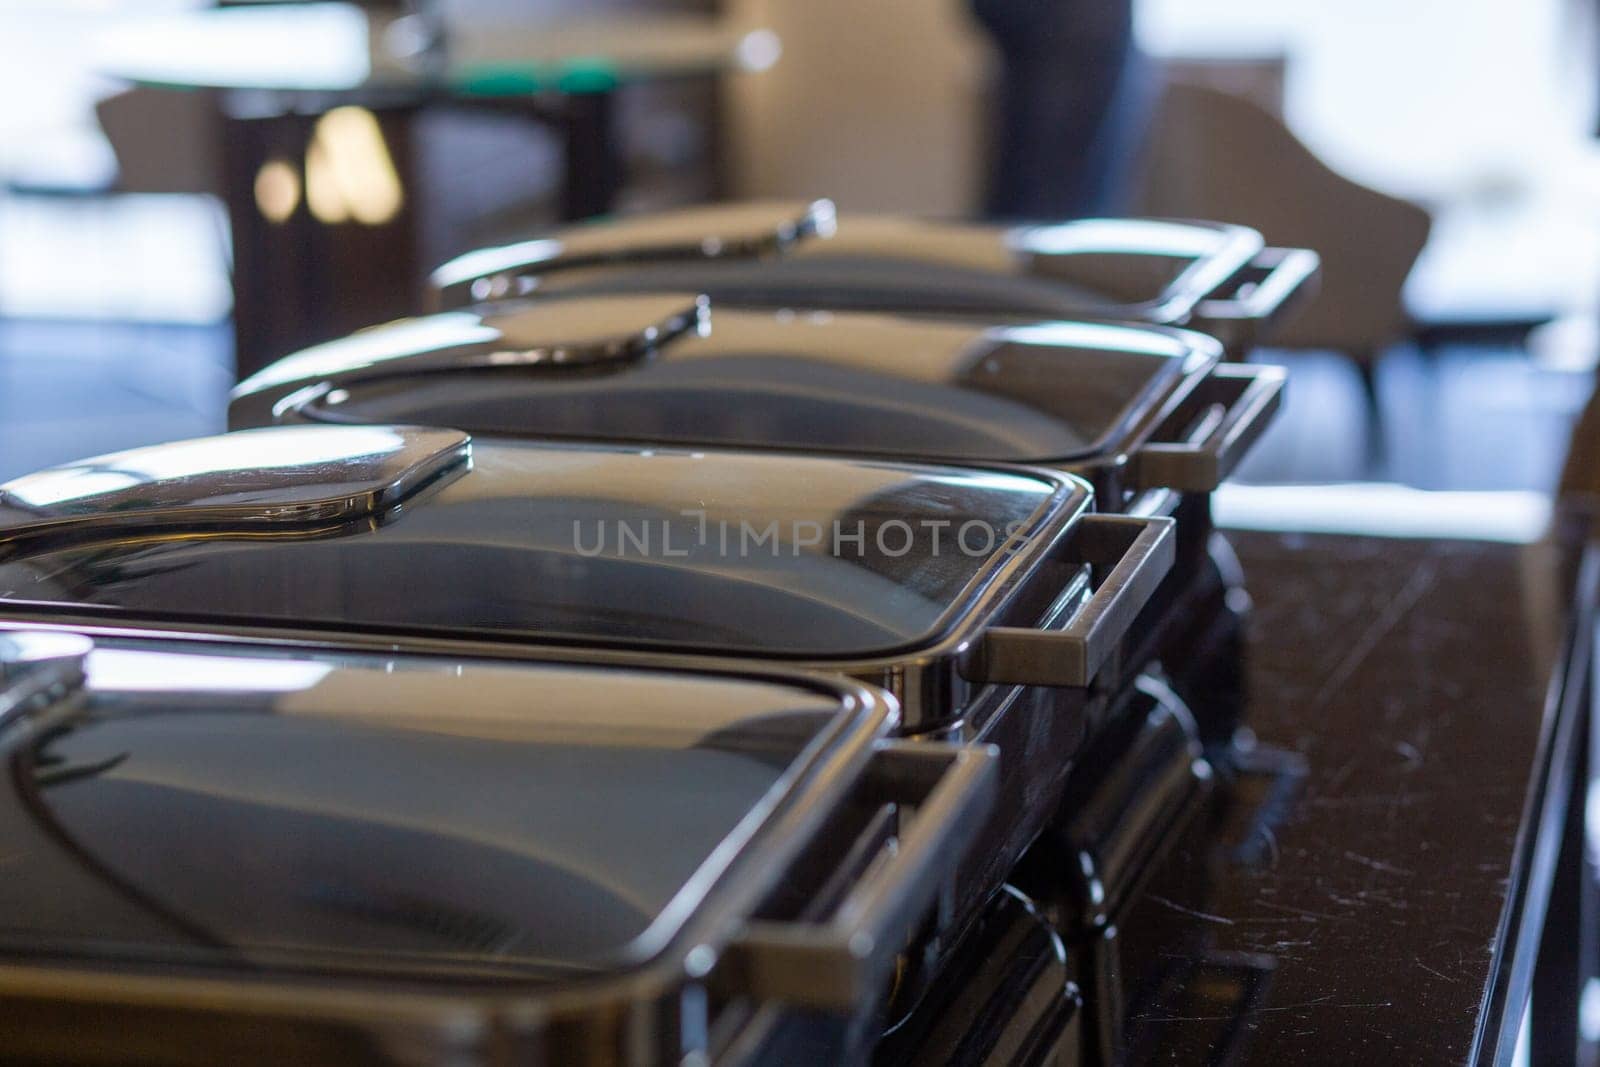 Row of closed buffet food dishes at party banquet hall. Chafing Dish ready for service made of stainless steel at buffet.